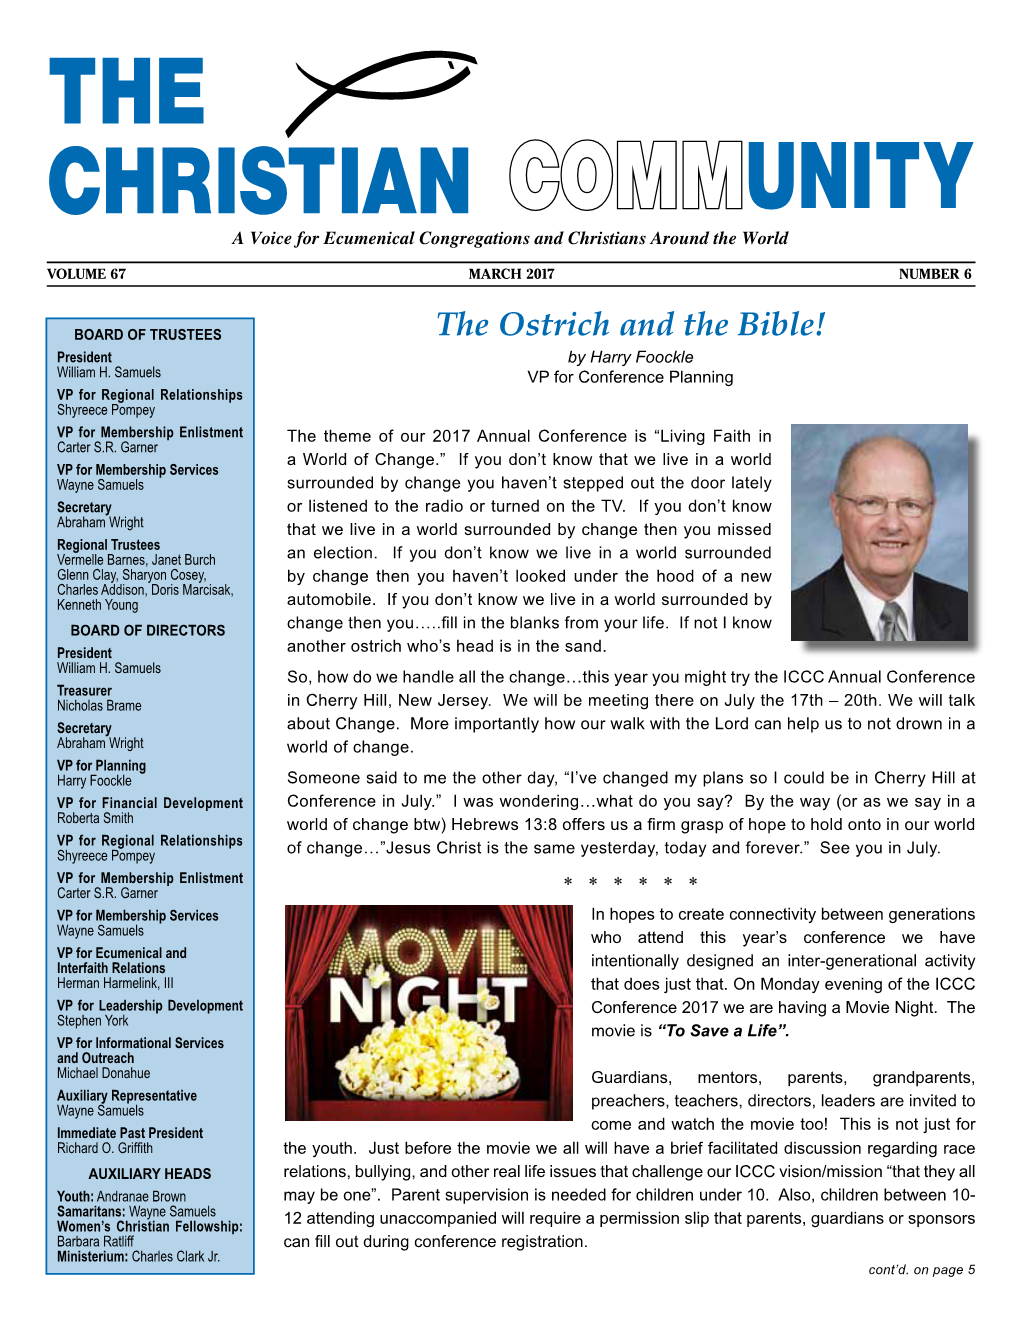 CHRISTIAN COMMUNITY a Voice for Ecumenical Congregations and Christians Around the World